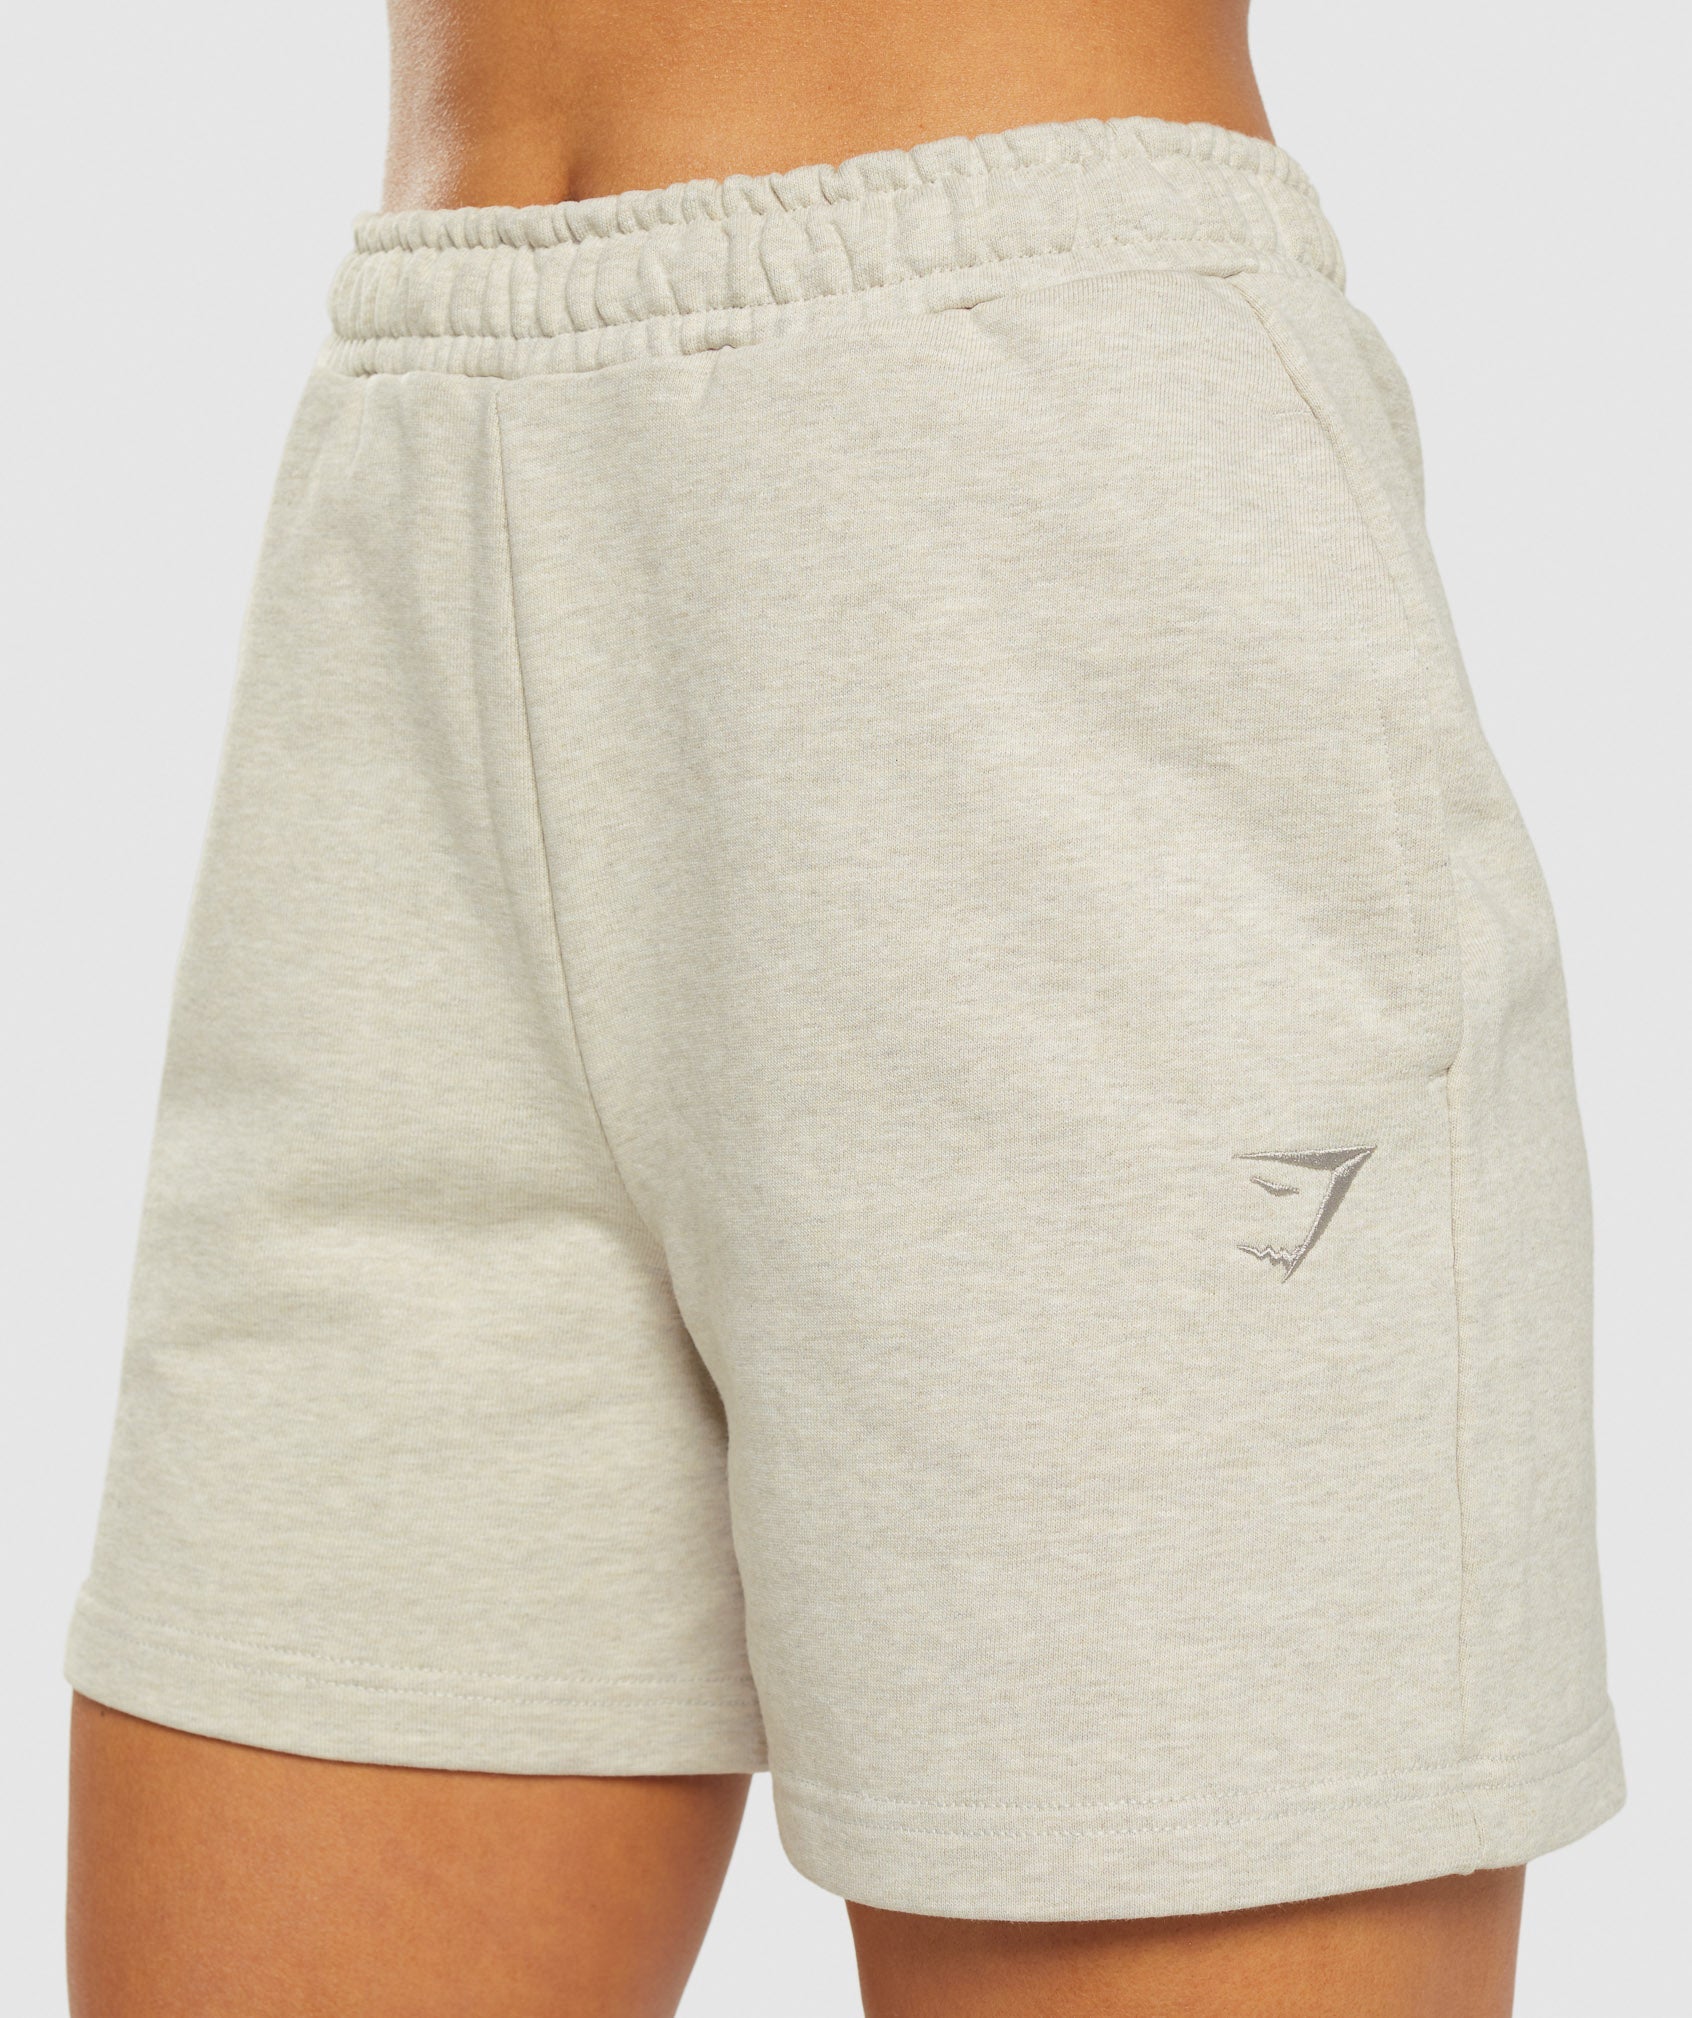 Rest Day Sweats Shorts in Sand Marl - view 6